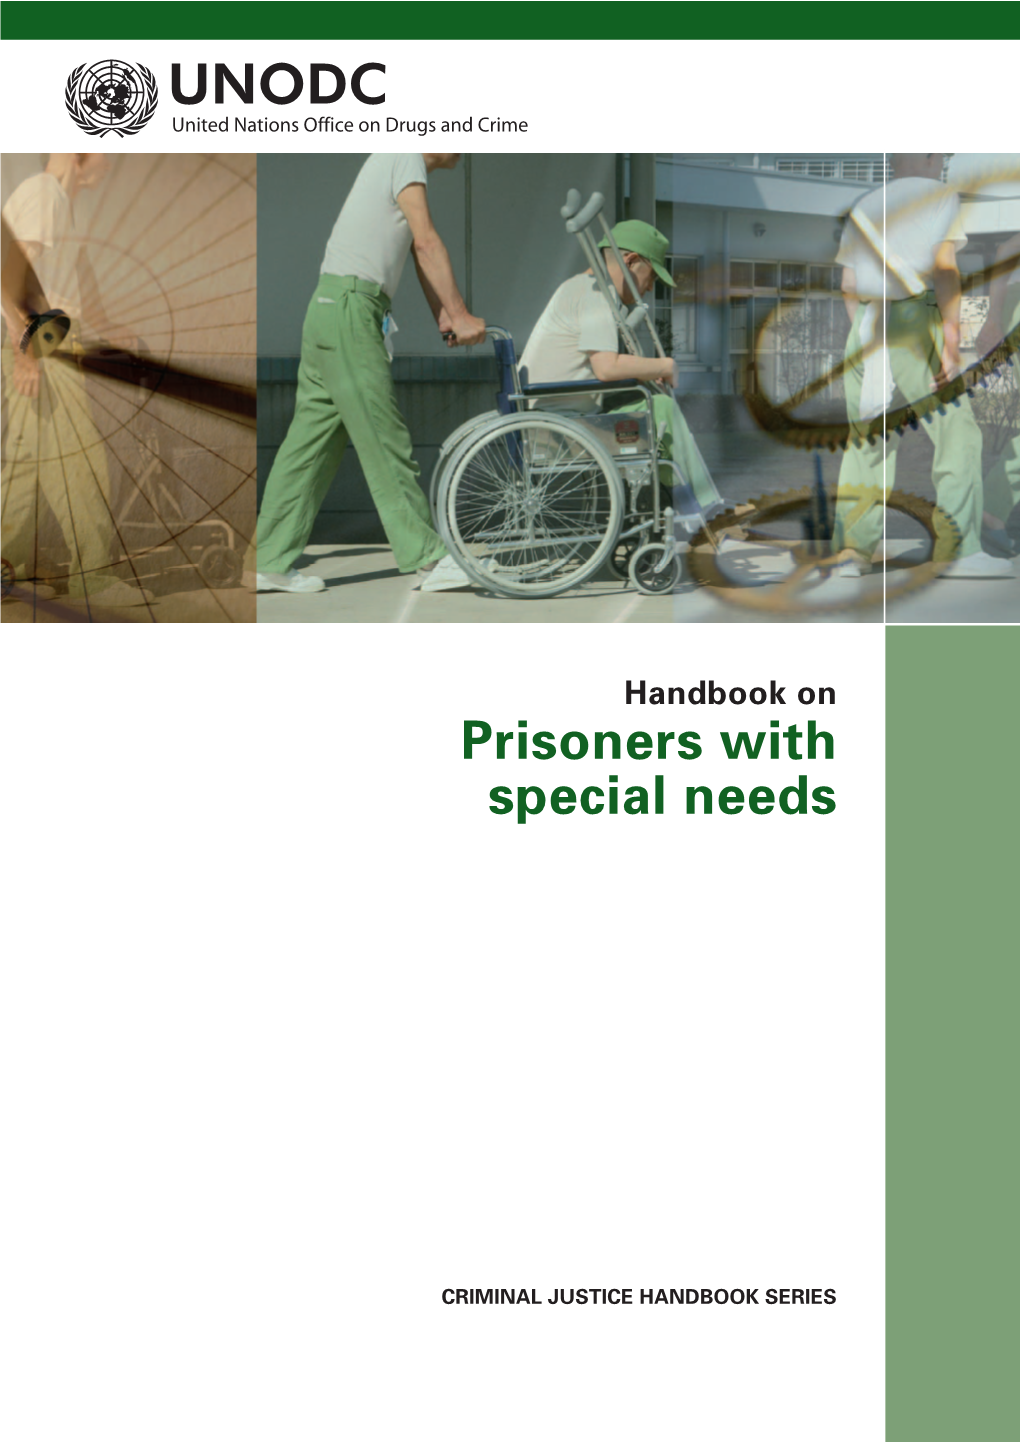 Handbook on Prisoners with Special Needs (CRIMINAL JUSTICE